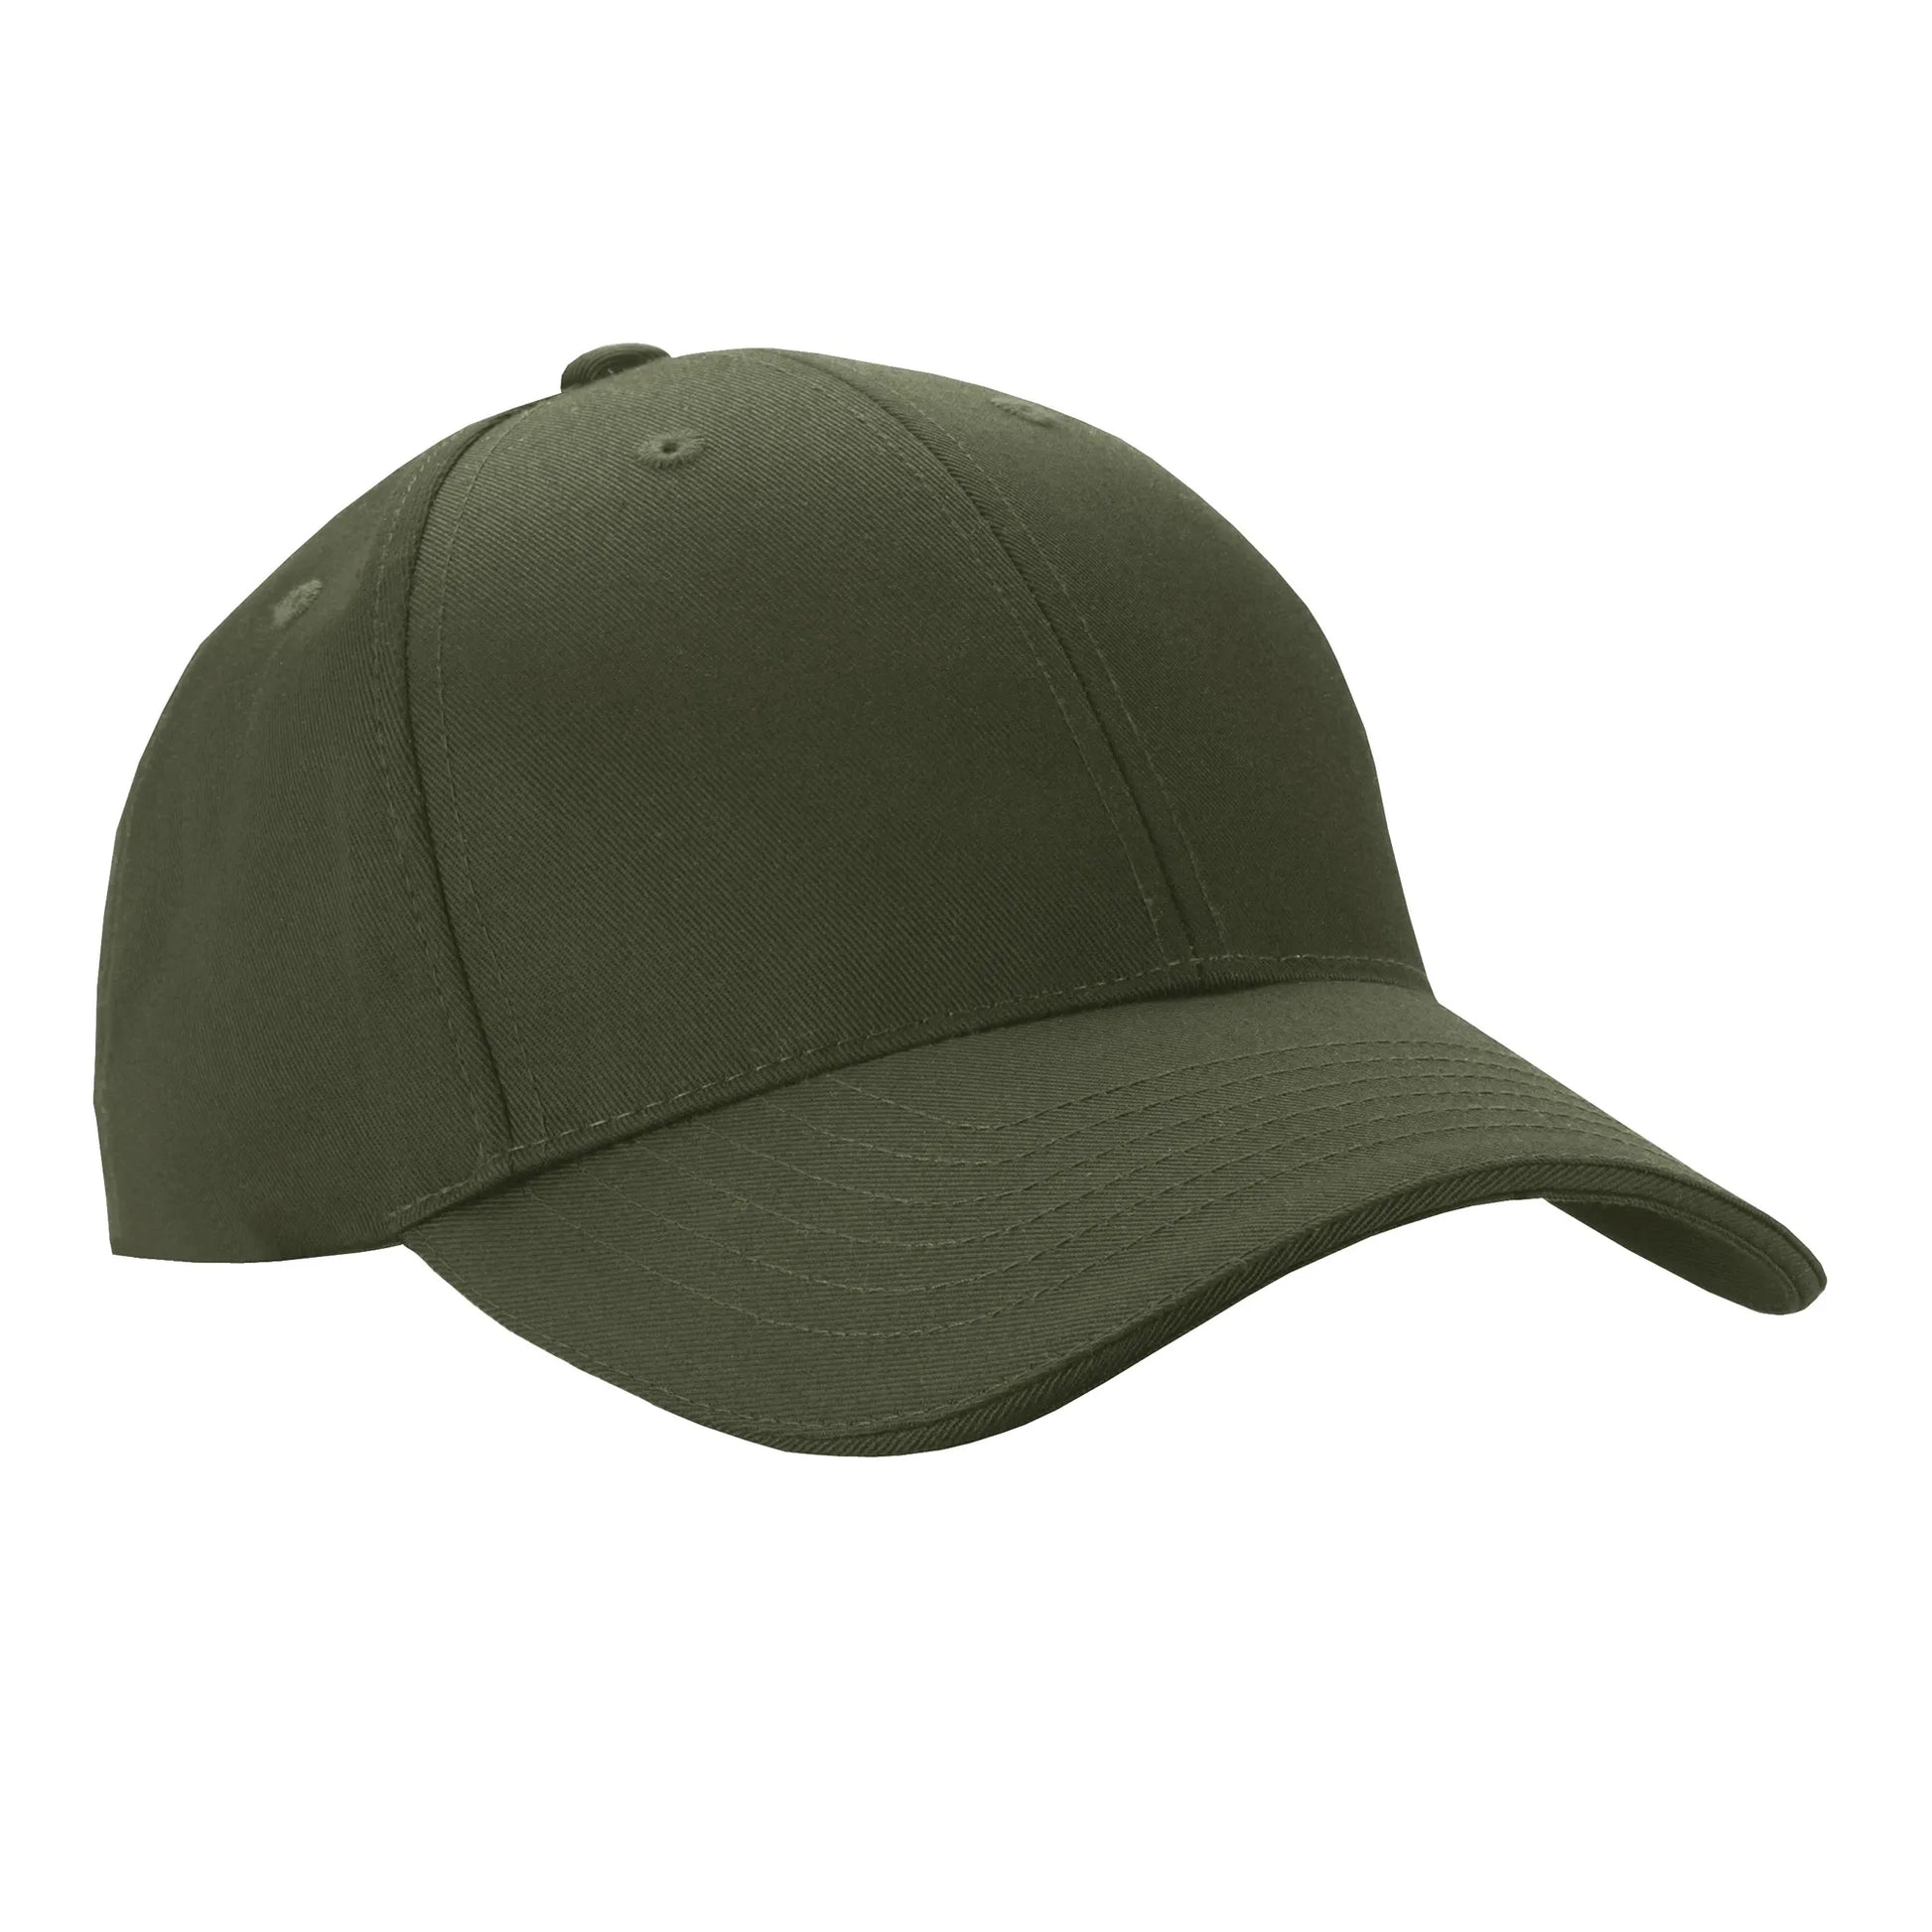 5.11 Tactical Adjustable Uniform Hat One-Size / Military Green